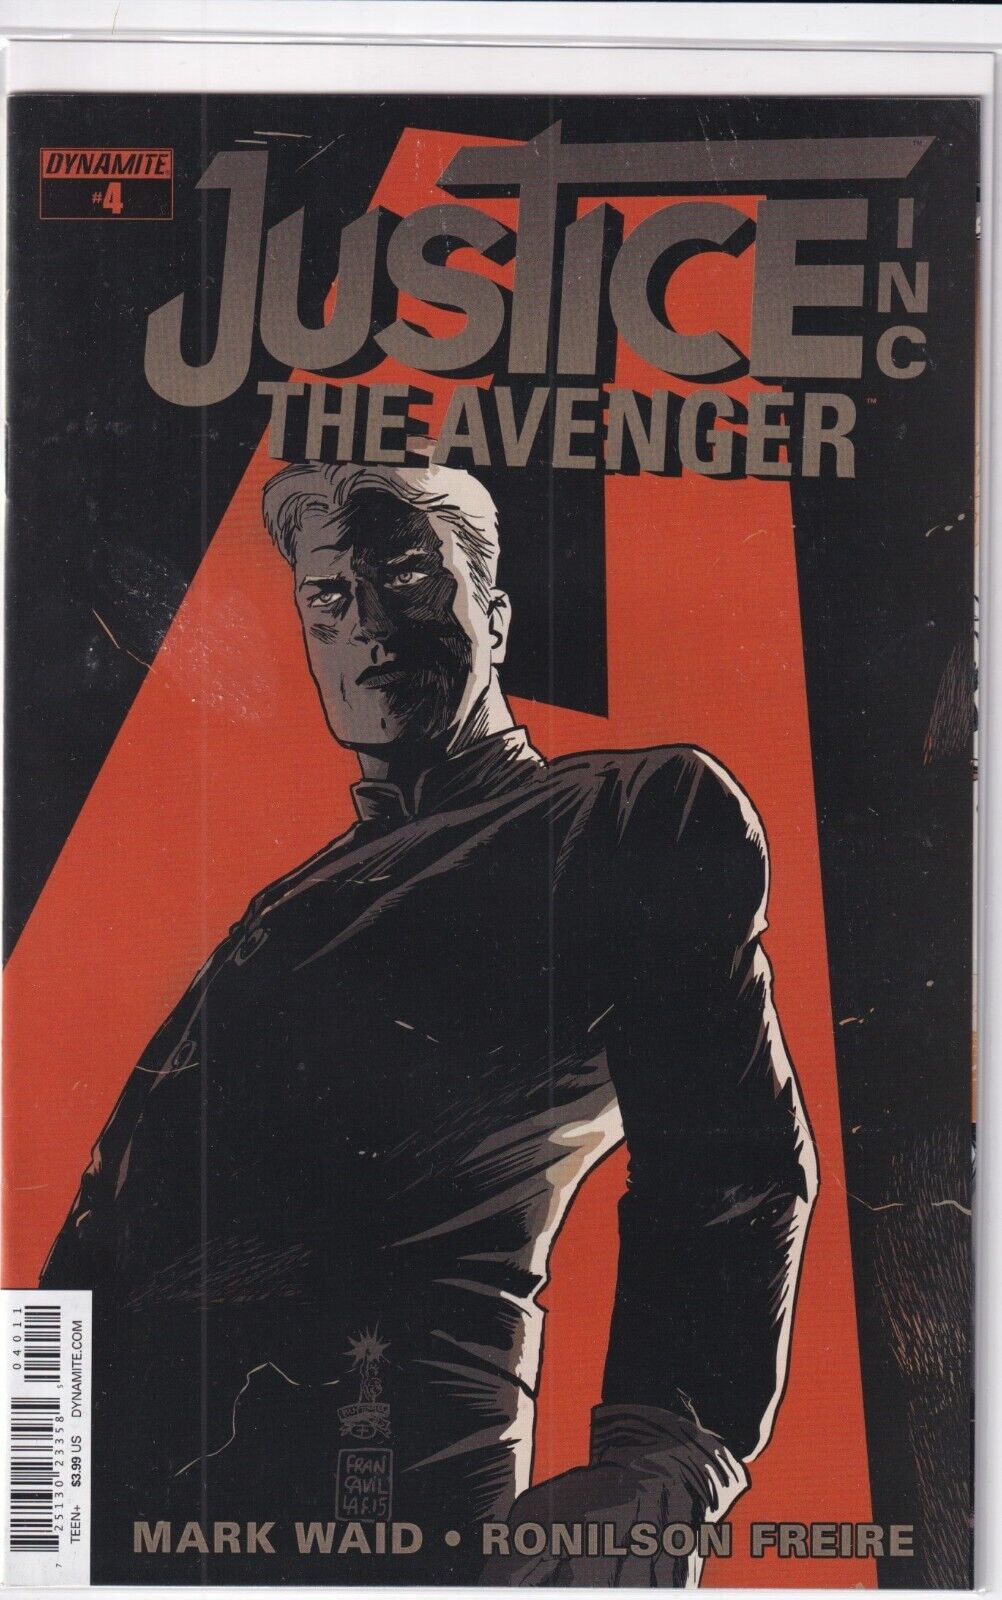 33161: Independent JUSTICE INC THE AVENGER #4 NM Grade Variant